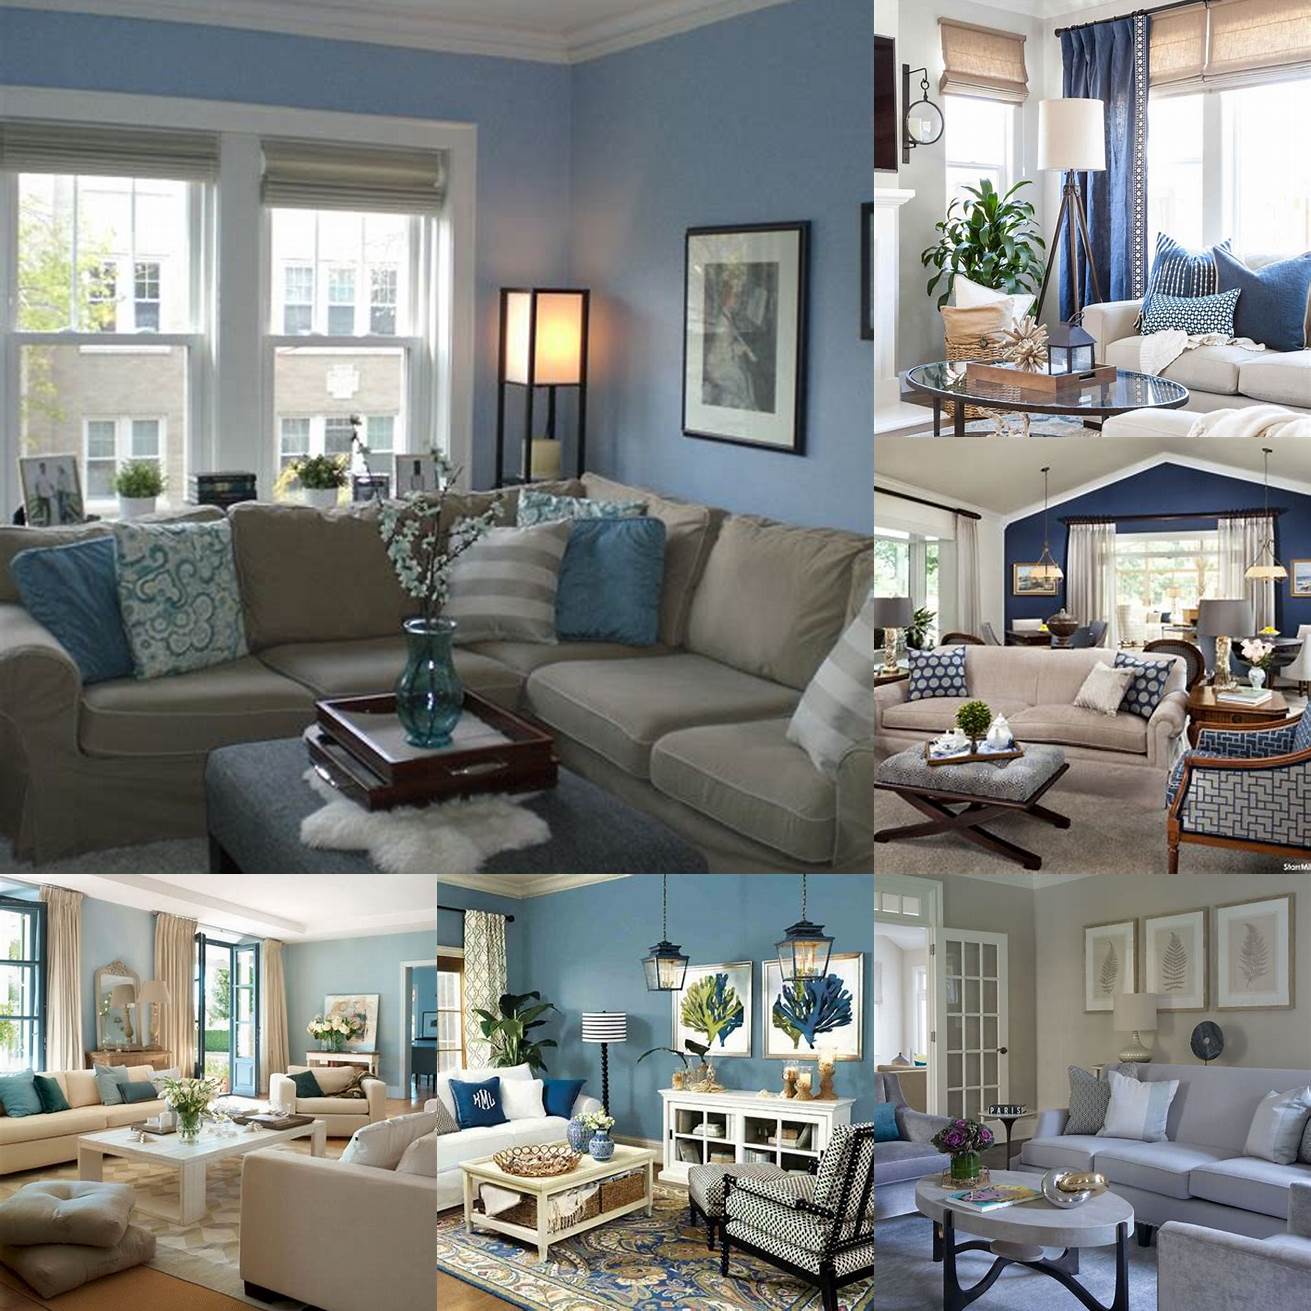 Beige living room with blue accents